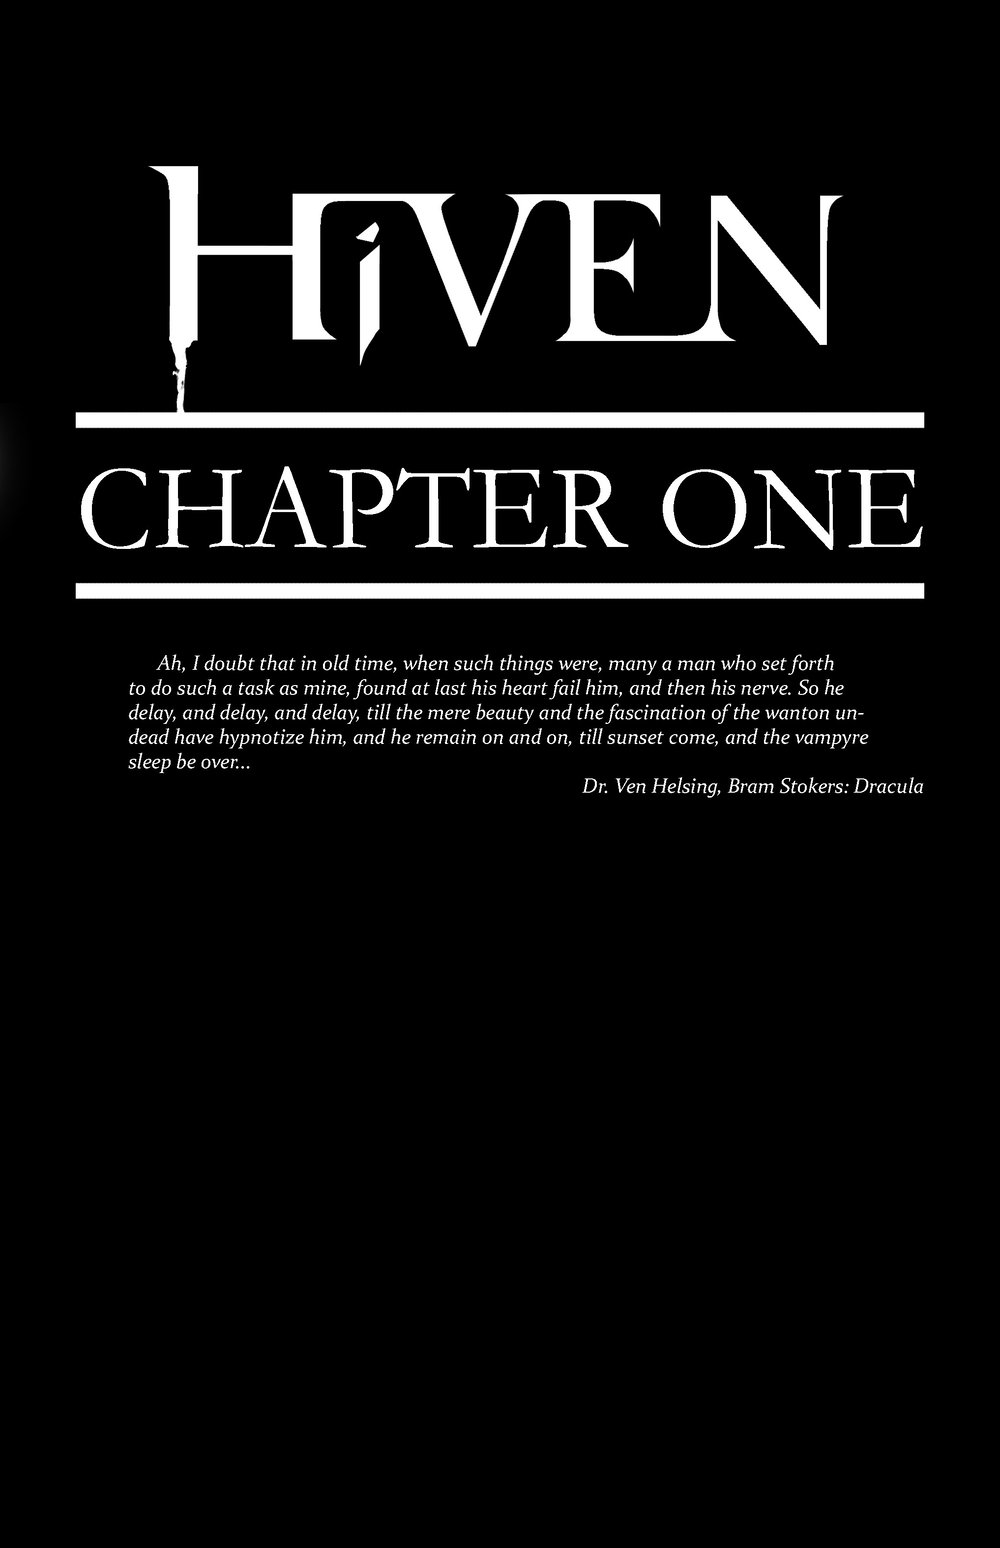 HiVEN - A VAMPYRE TALE